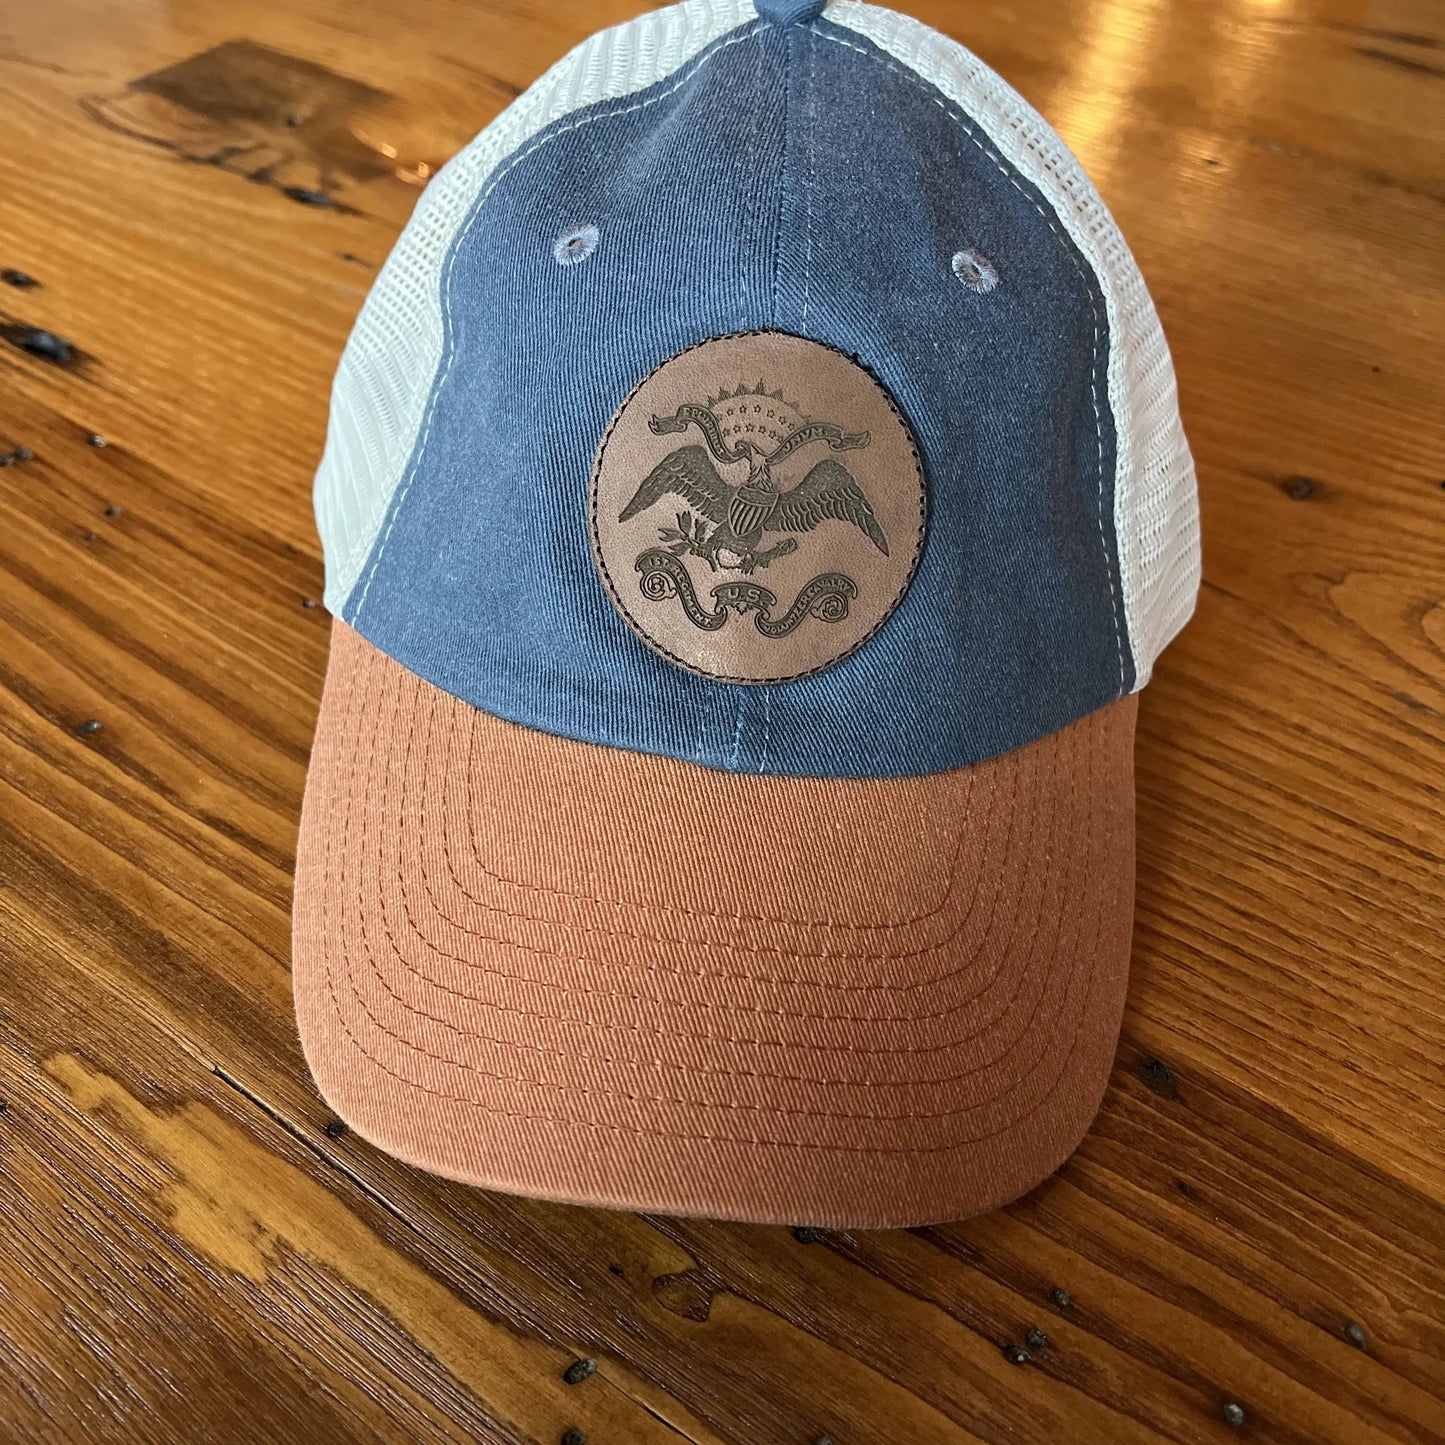 Teddy Roosevelt "Rough Riders" Leather patch cap